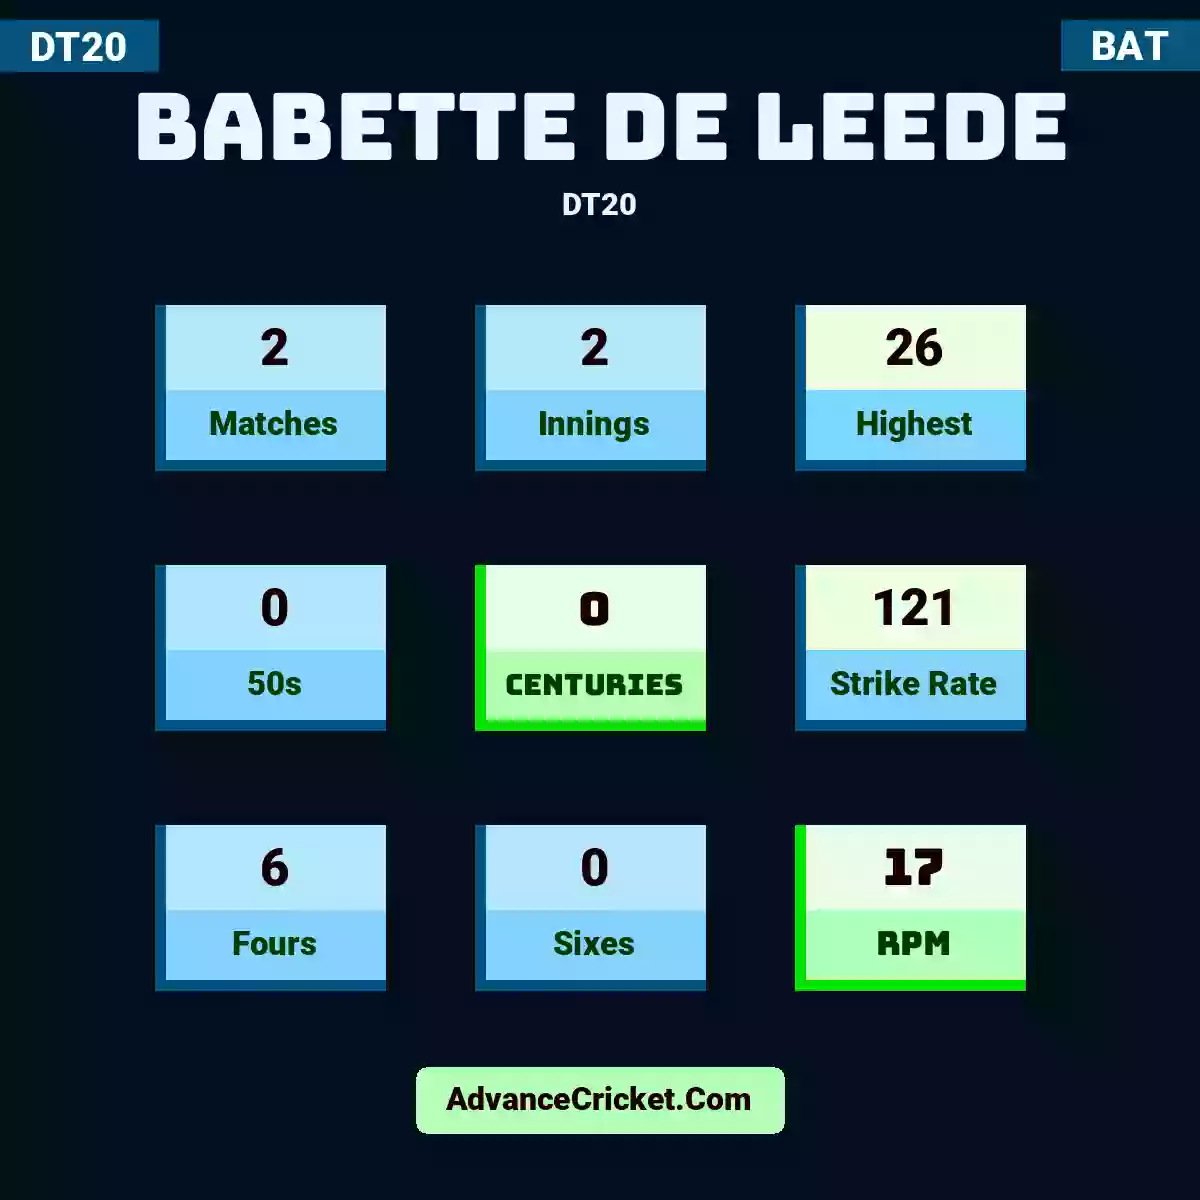 Babette de Leede DT20 , Babette de Leede played 2 matches, scored 26 runs as highest, 0 half-centuries, and 0 centuries, with a strike rate of 121. B.Leede hit 6 fours and 0 sixes, with an RPM of 17.